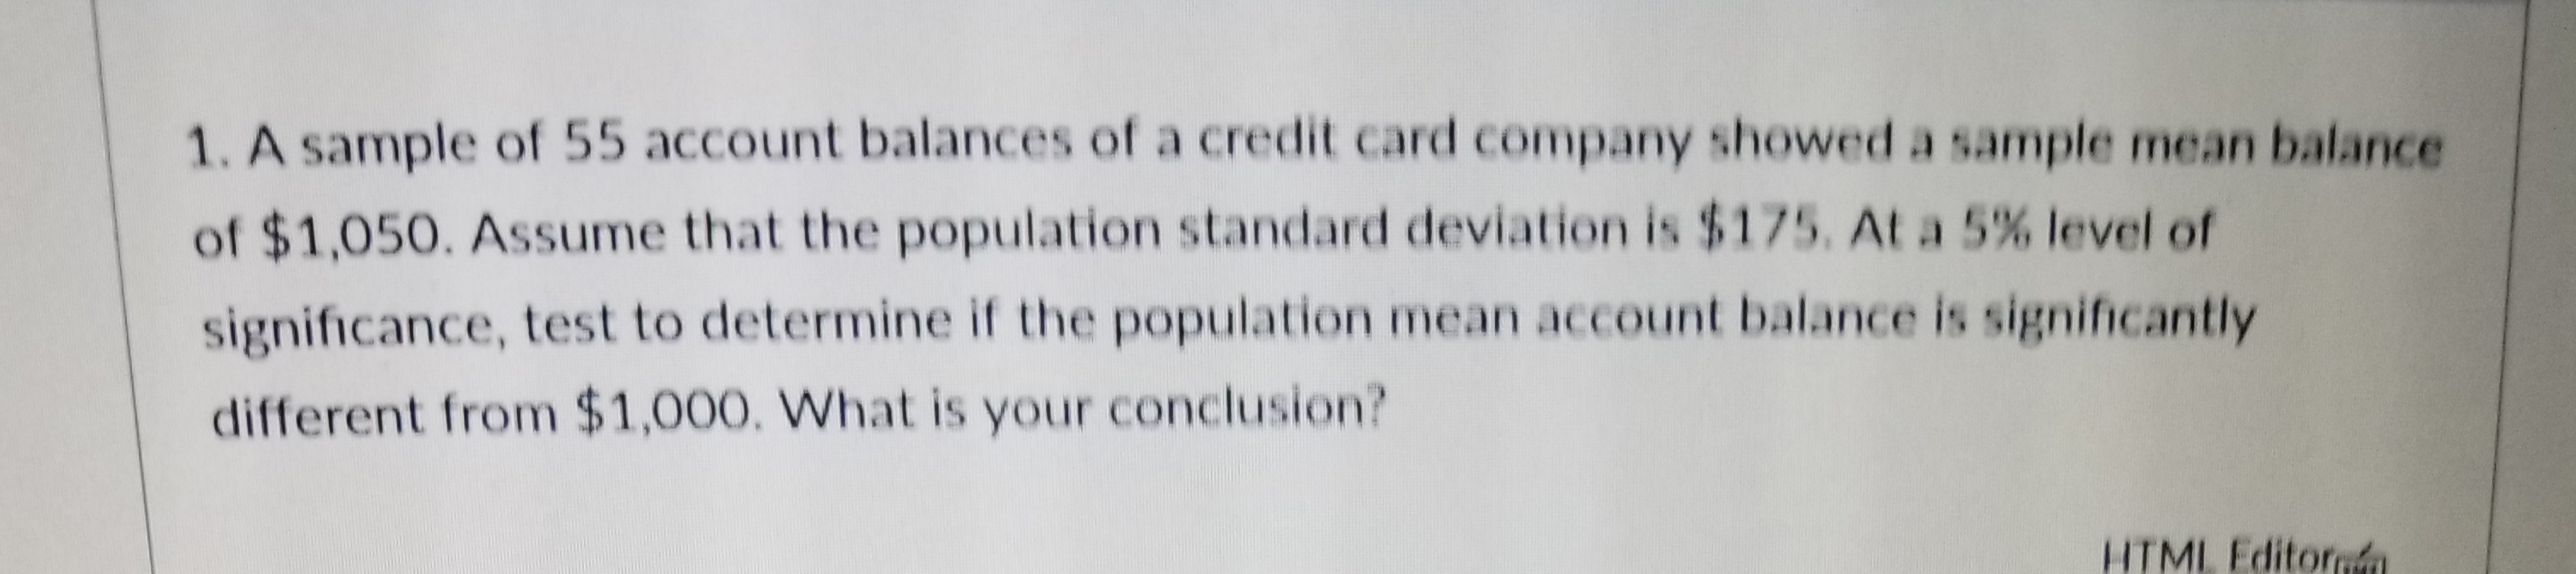 1. A sample of 55 account balances of a credit card company showed a sample mean balance
of $1,050. Assume that the population standard deviation is$175. At a 5% level of
significance, test to determine if the population mean account balance is significantly
different from $1,000. What is your conclusion?
HTMI Editora
